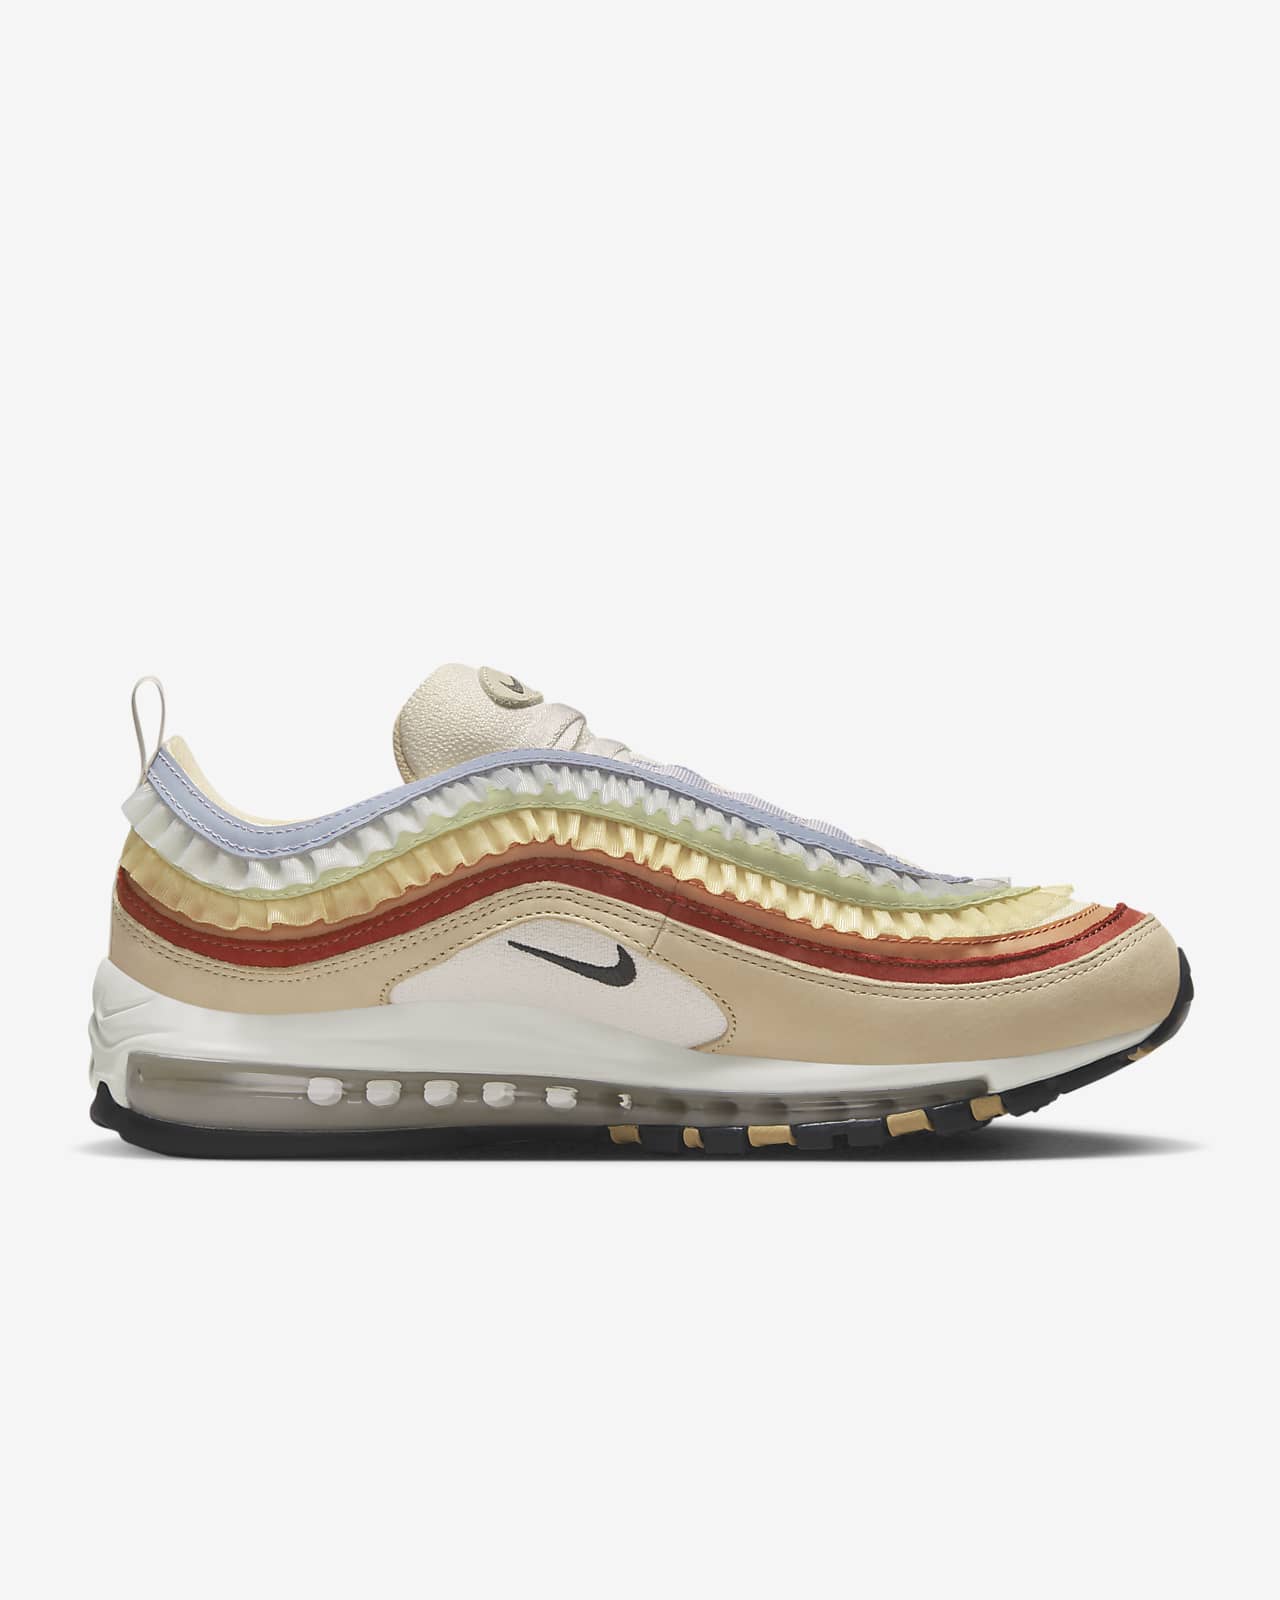 duidelijk Staat uitsterven Nike Air Max 97 Be True Shoes. Nike NL